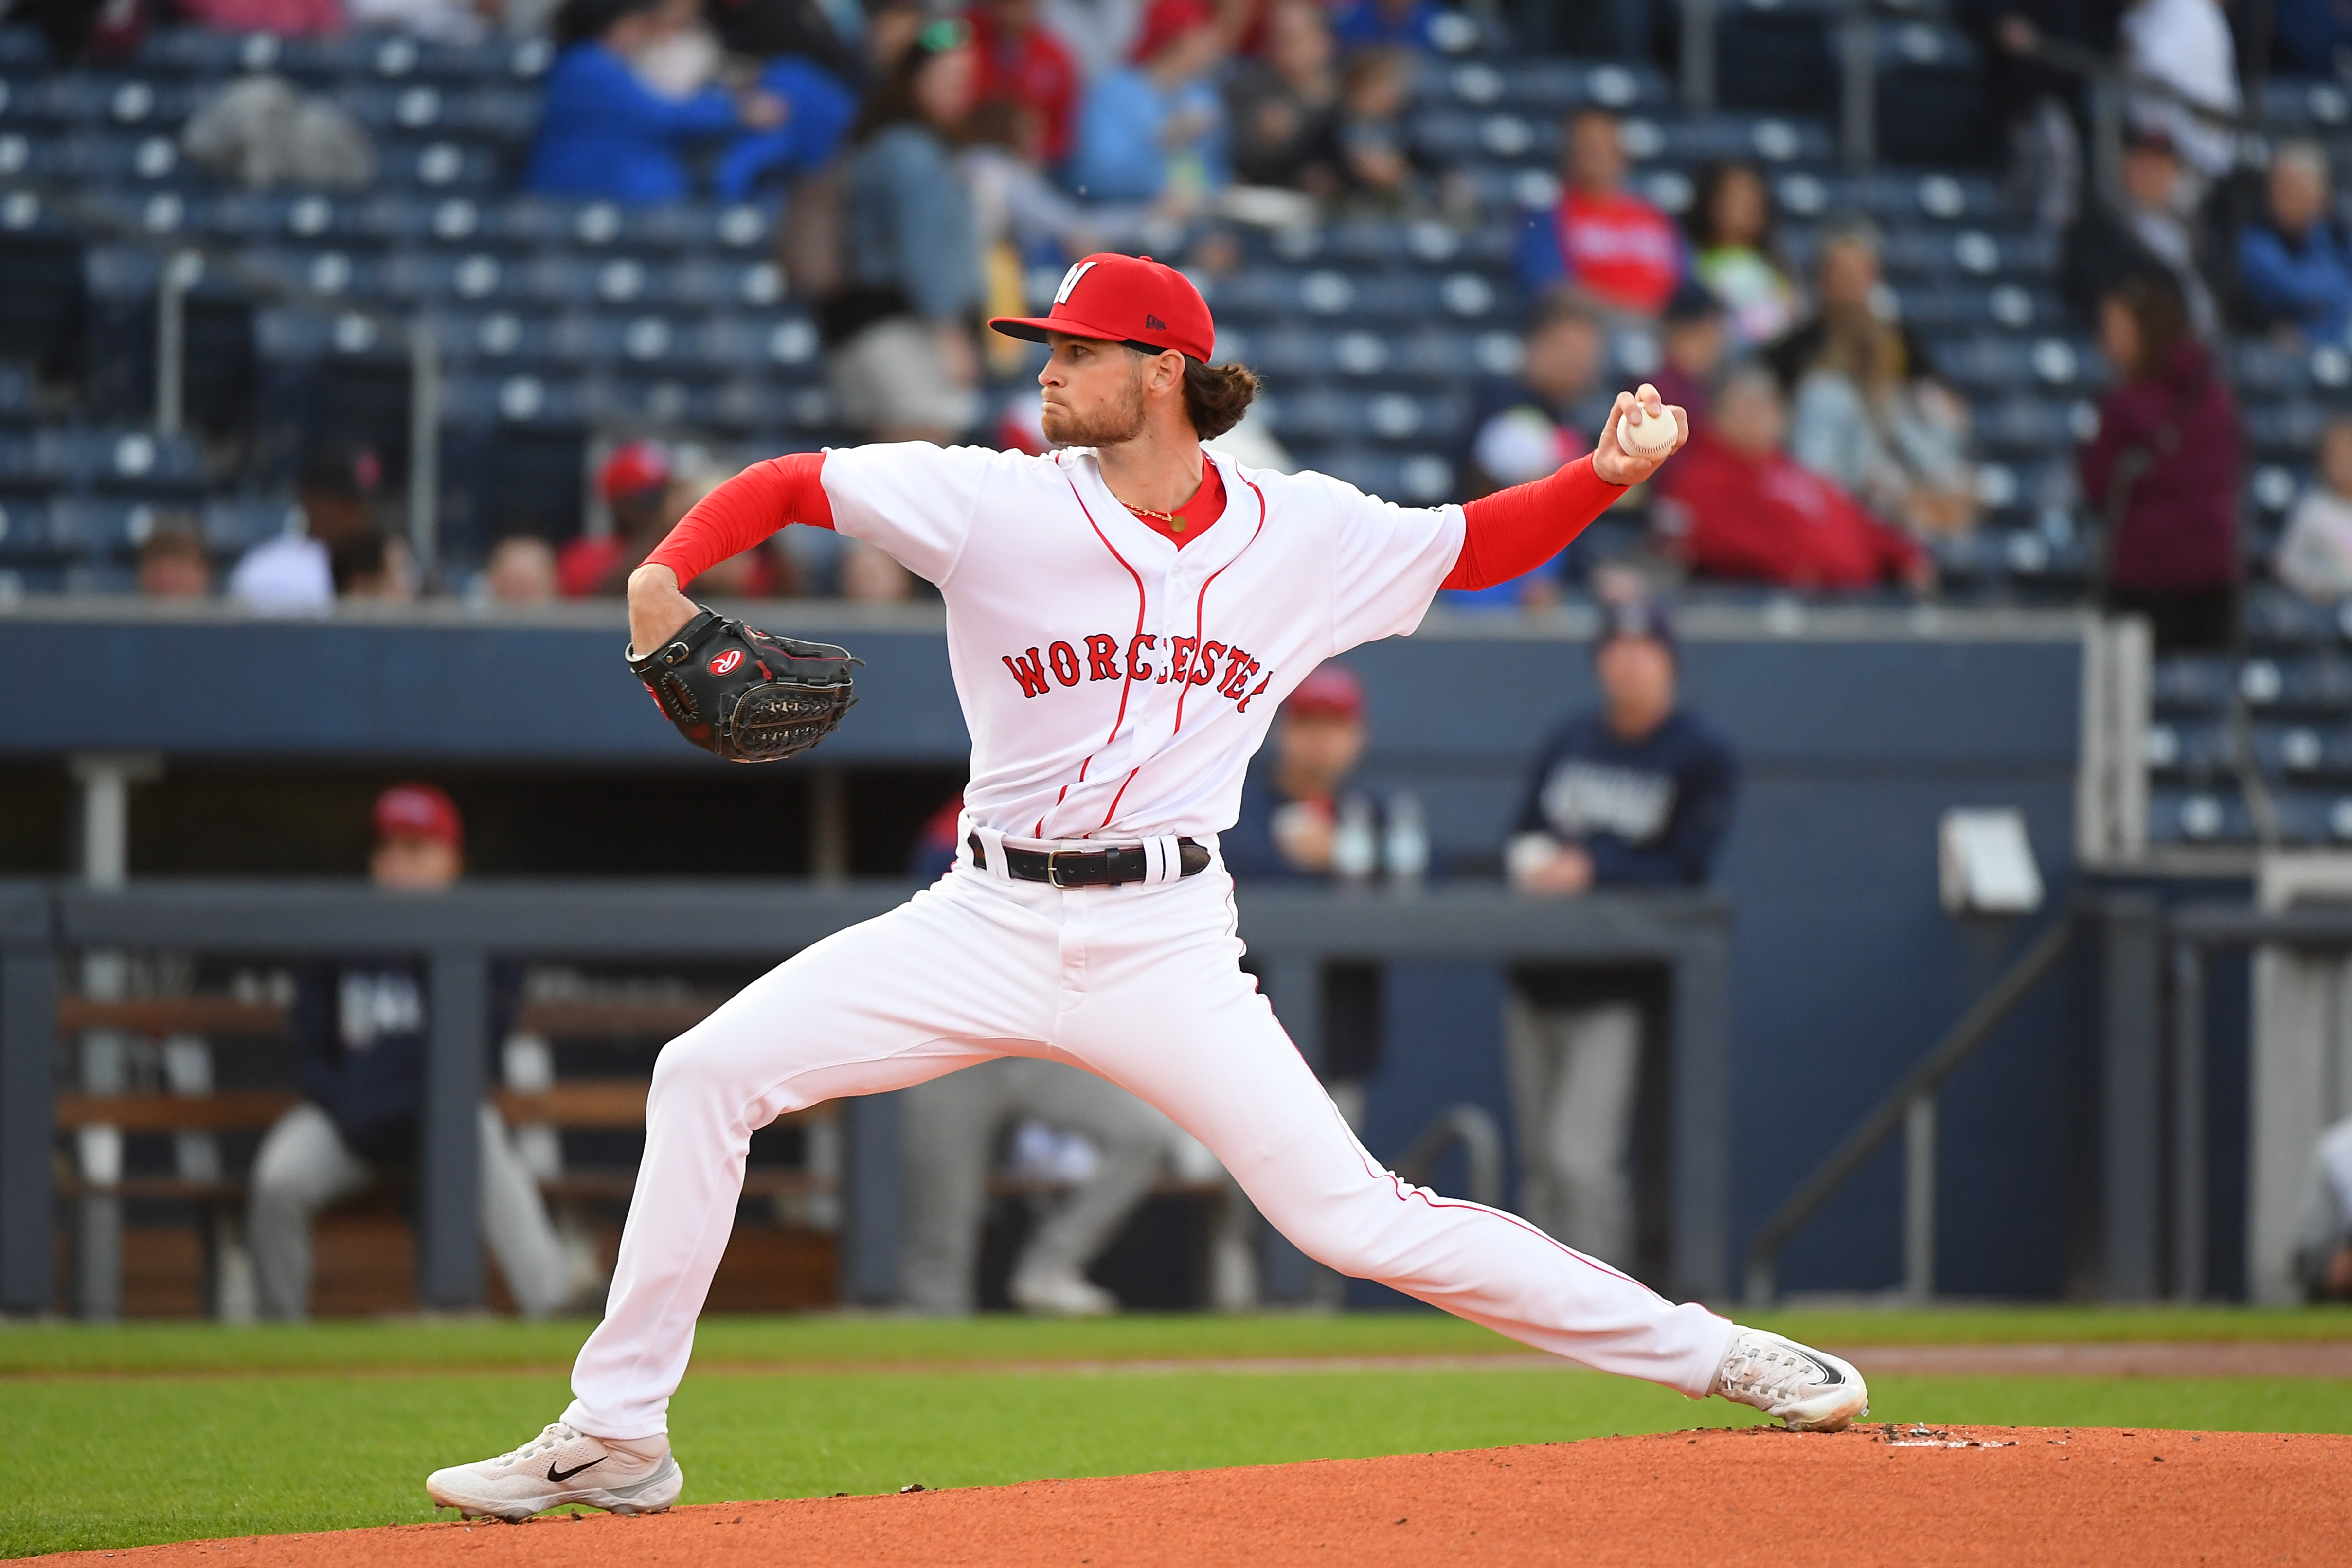 MiLB: MAY 18 Lehigh Valley IronPigs at Worcester Red Sox